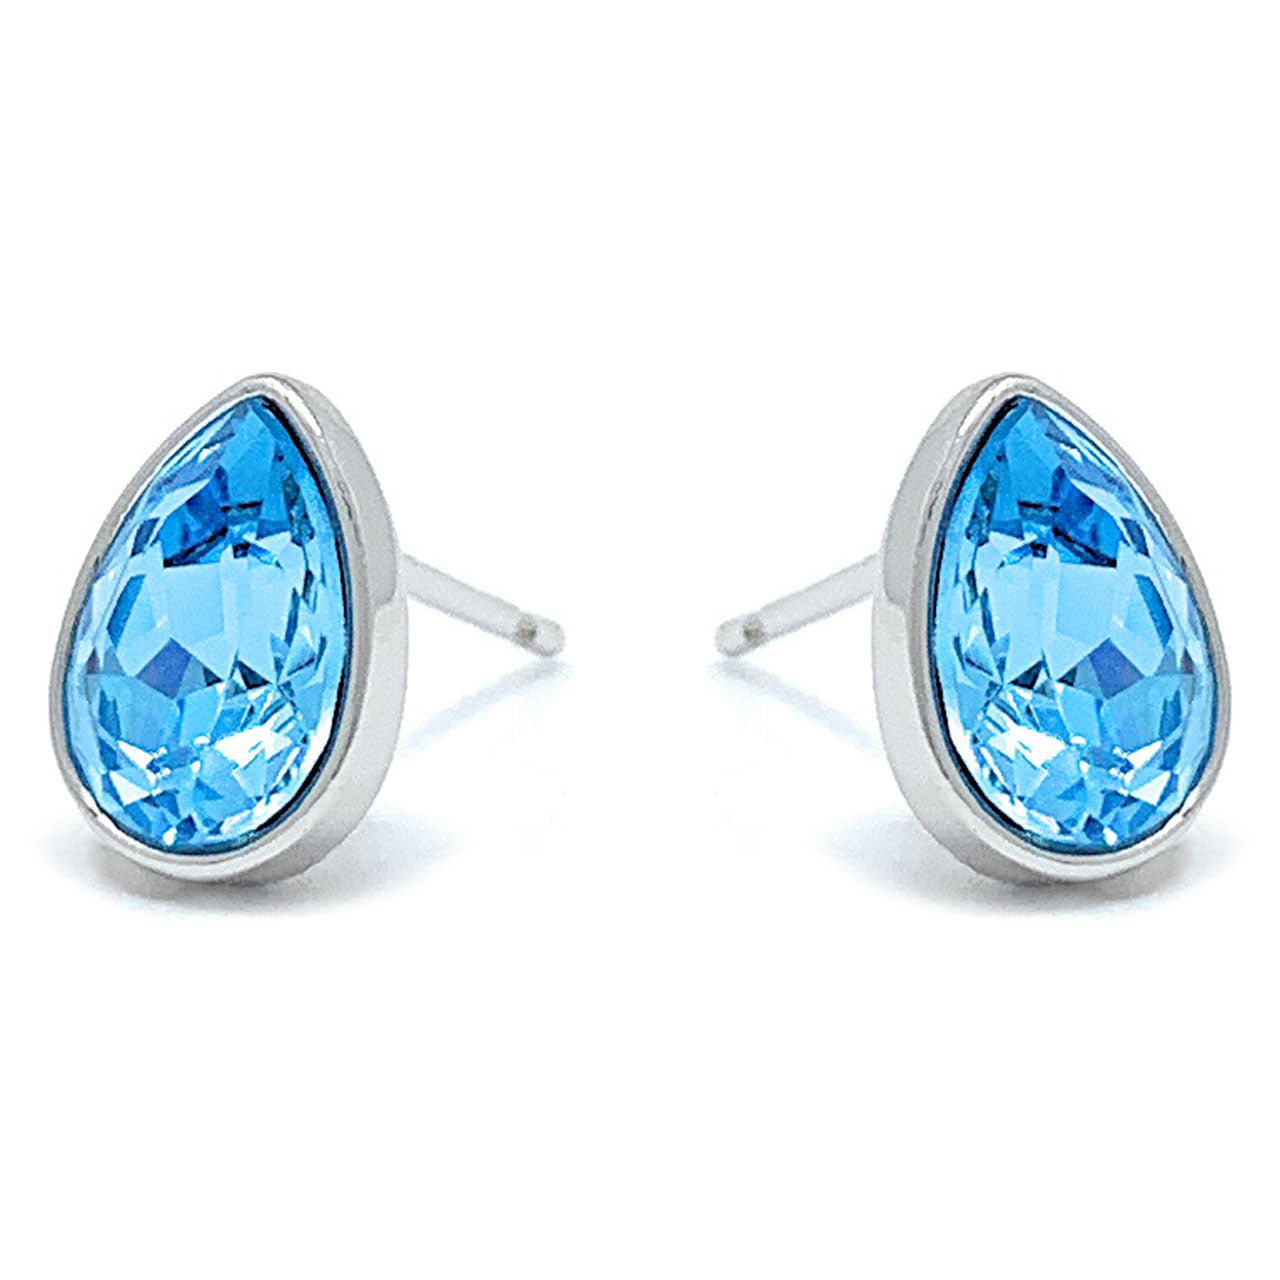 Mary Small Stud Earrings with Blue Aquamarine Drop Crystals from Swarovski Silver Toned Rhodium Plated - Ed Heart